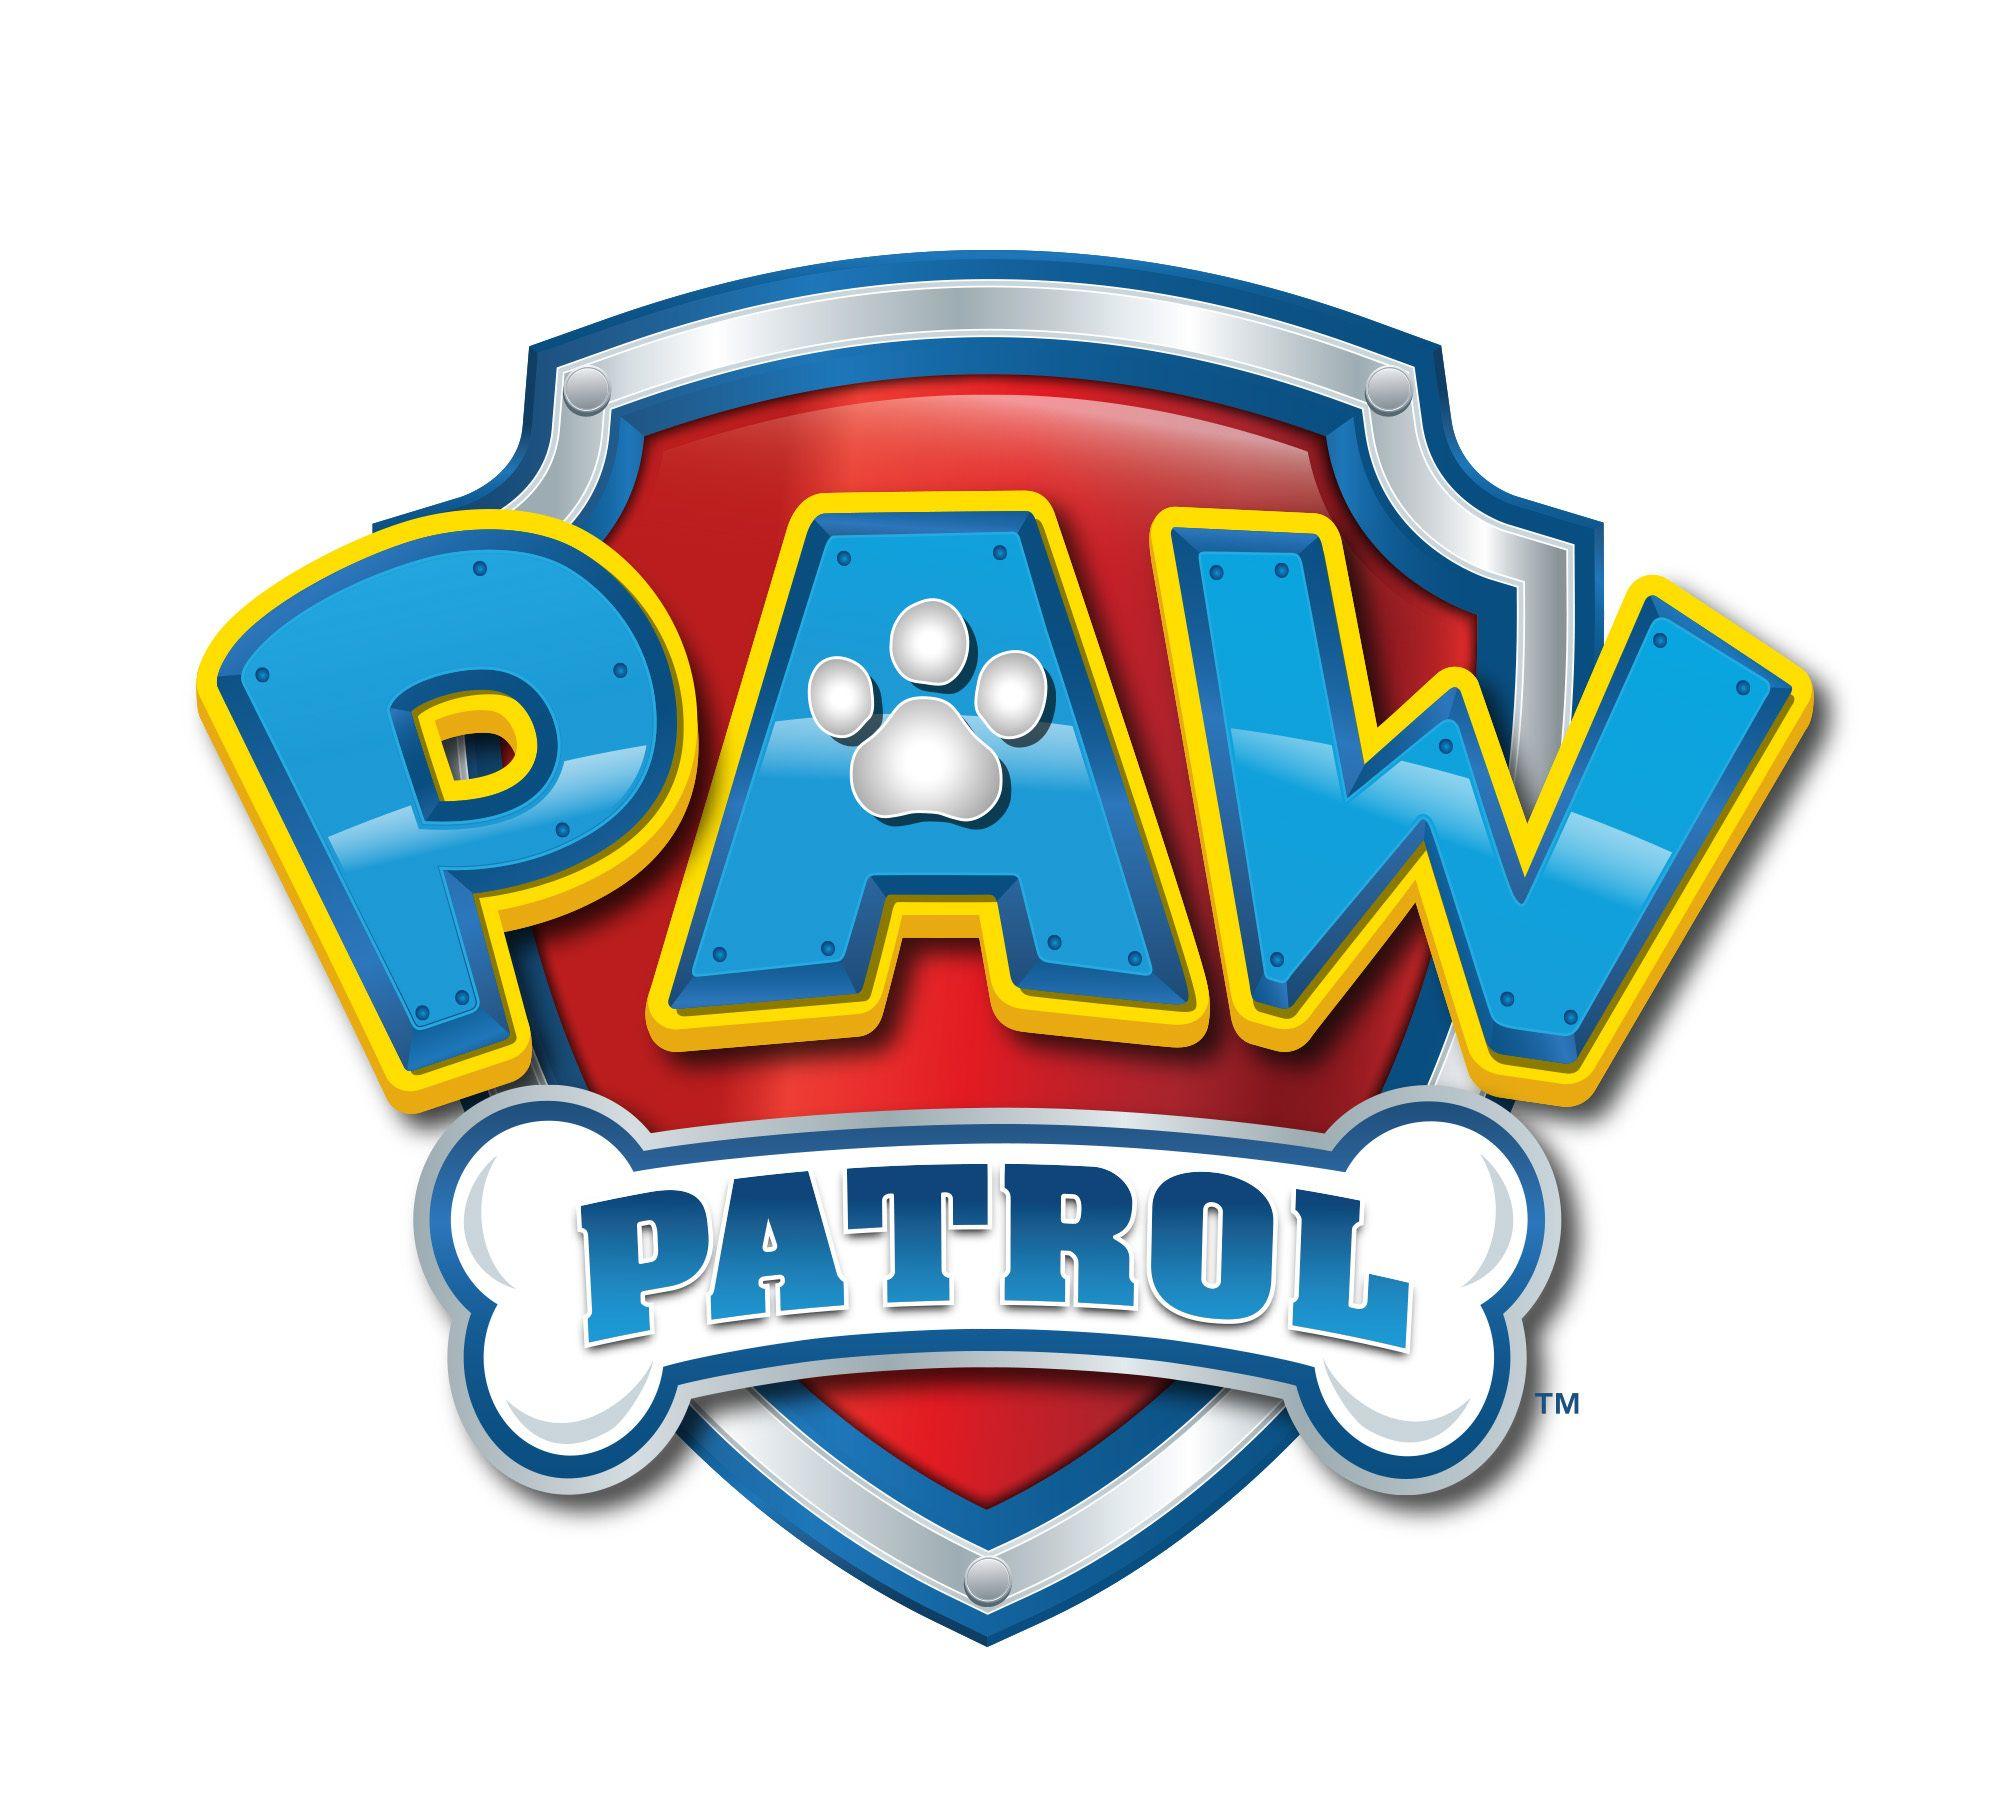 Blue Paw Patrol Logo - Nickelodeon's Courageous PAW Patrol Pups Team up with Real-Life ...